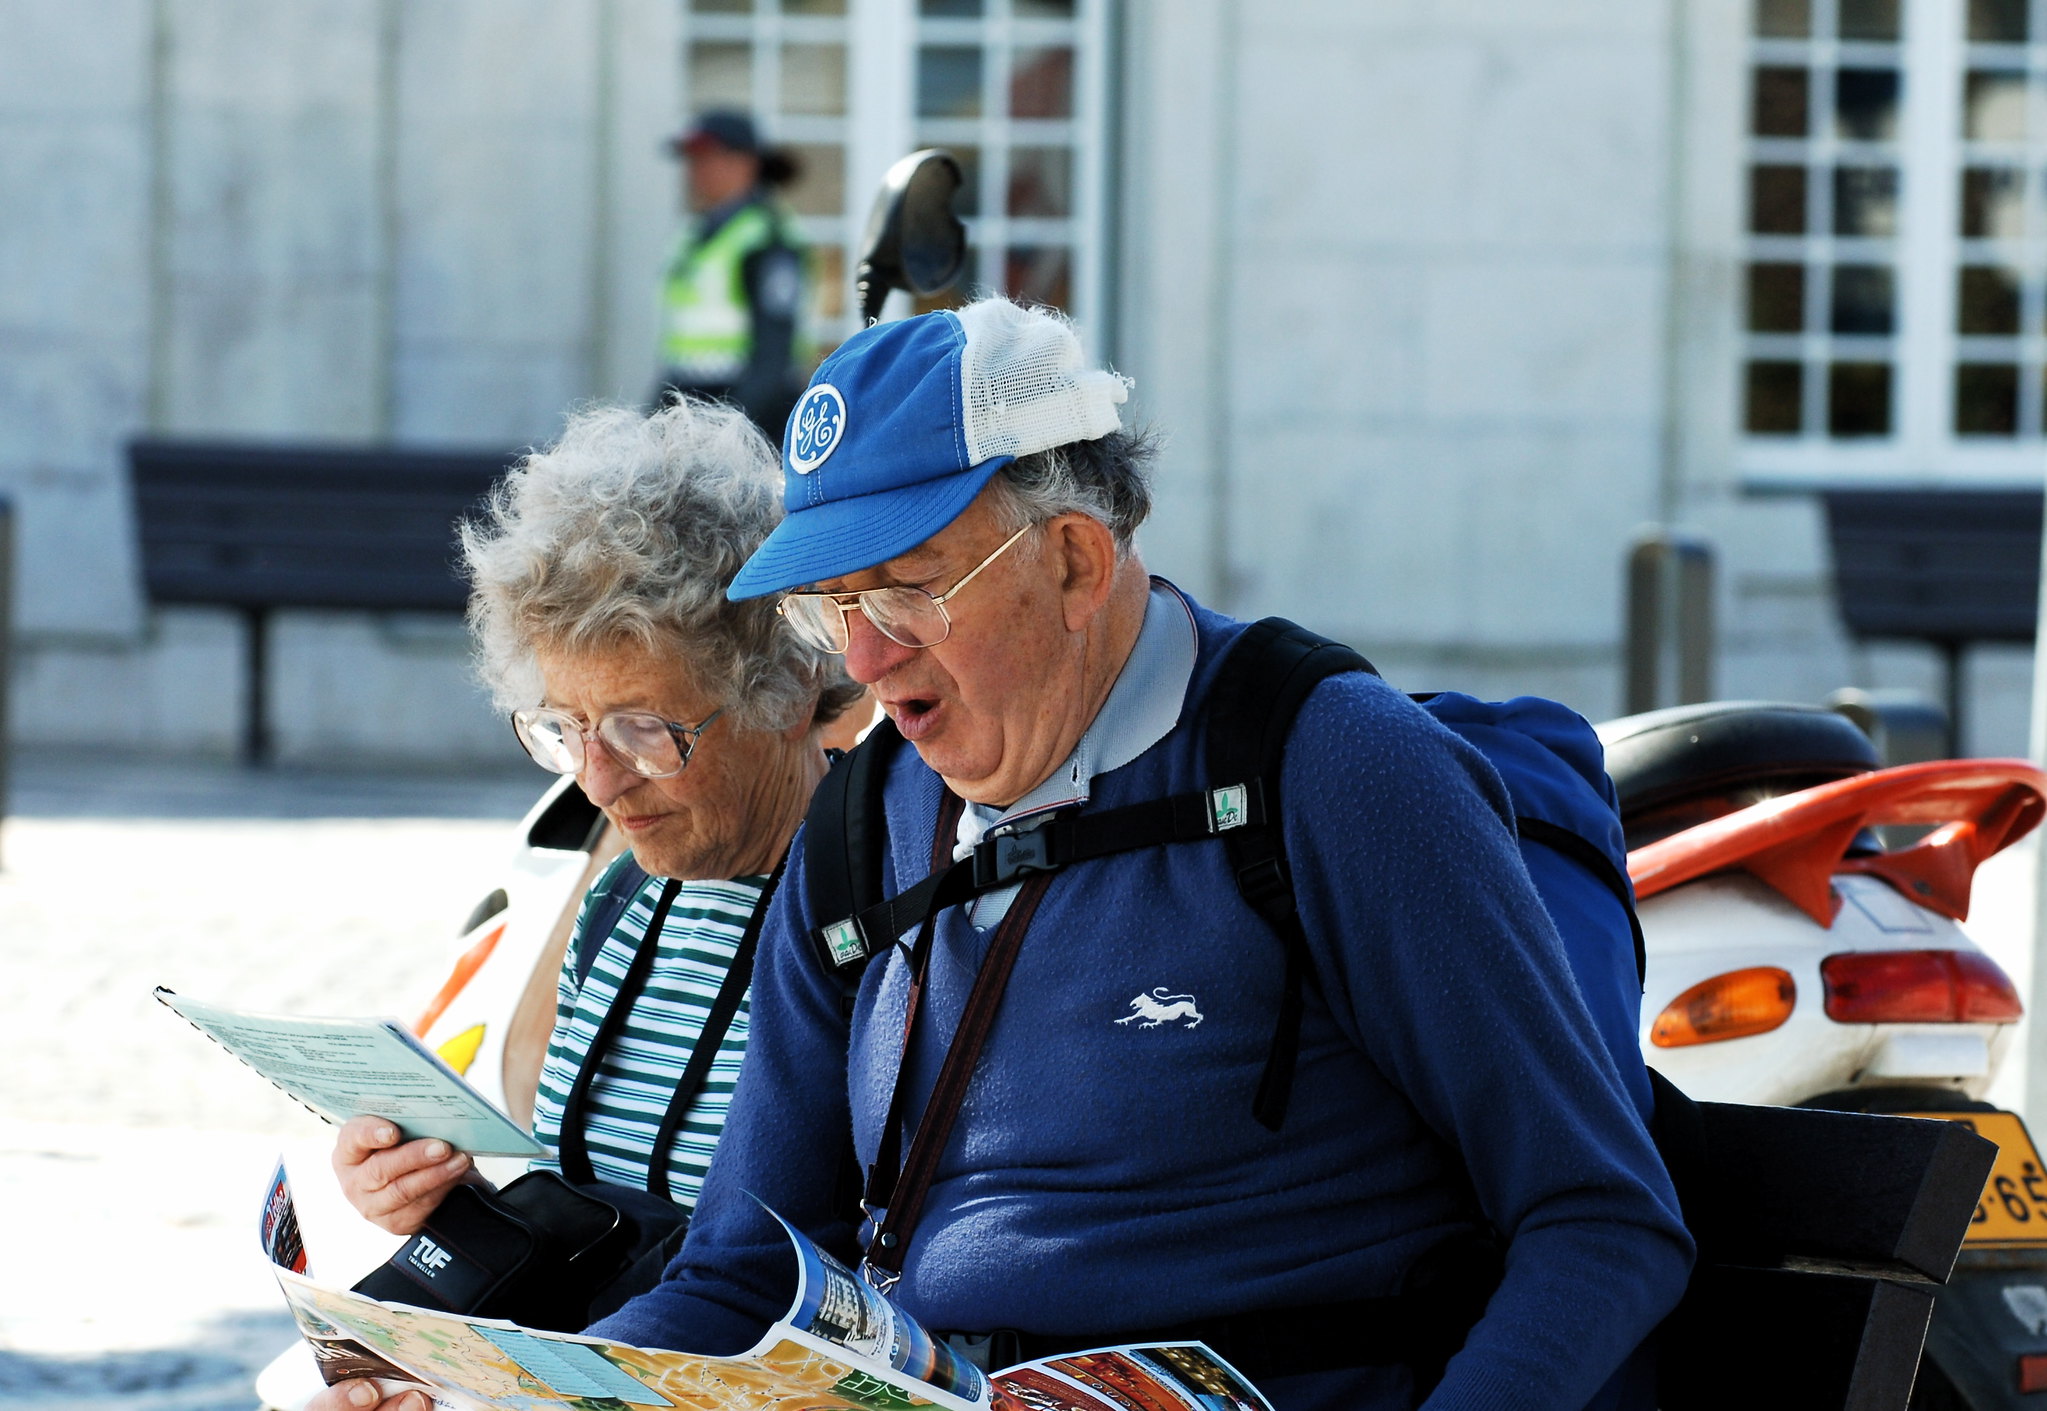 An elderly couple touring together | Source: flickr